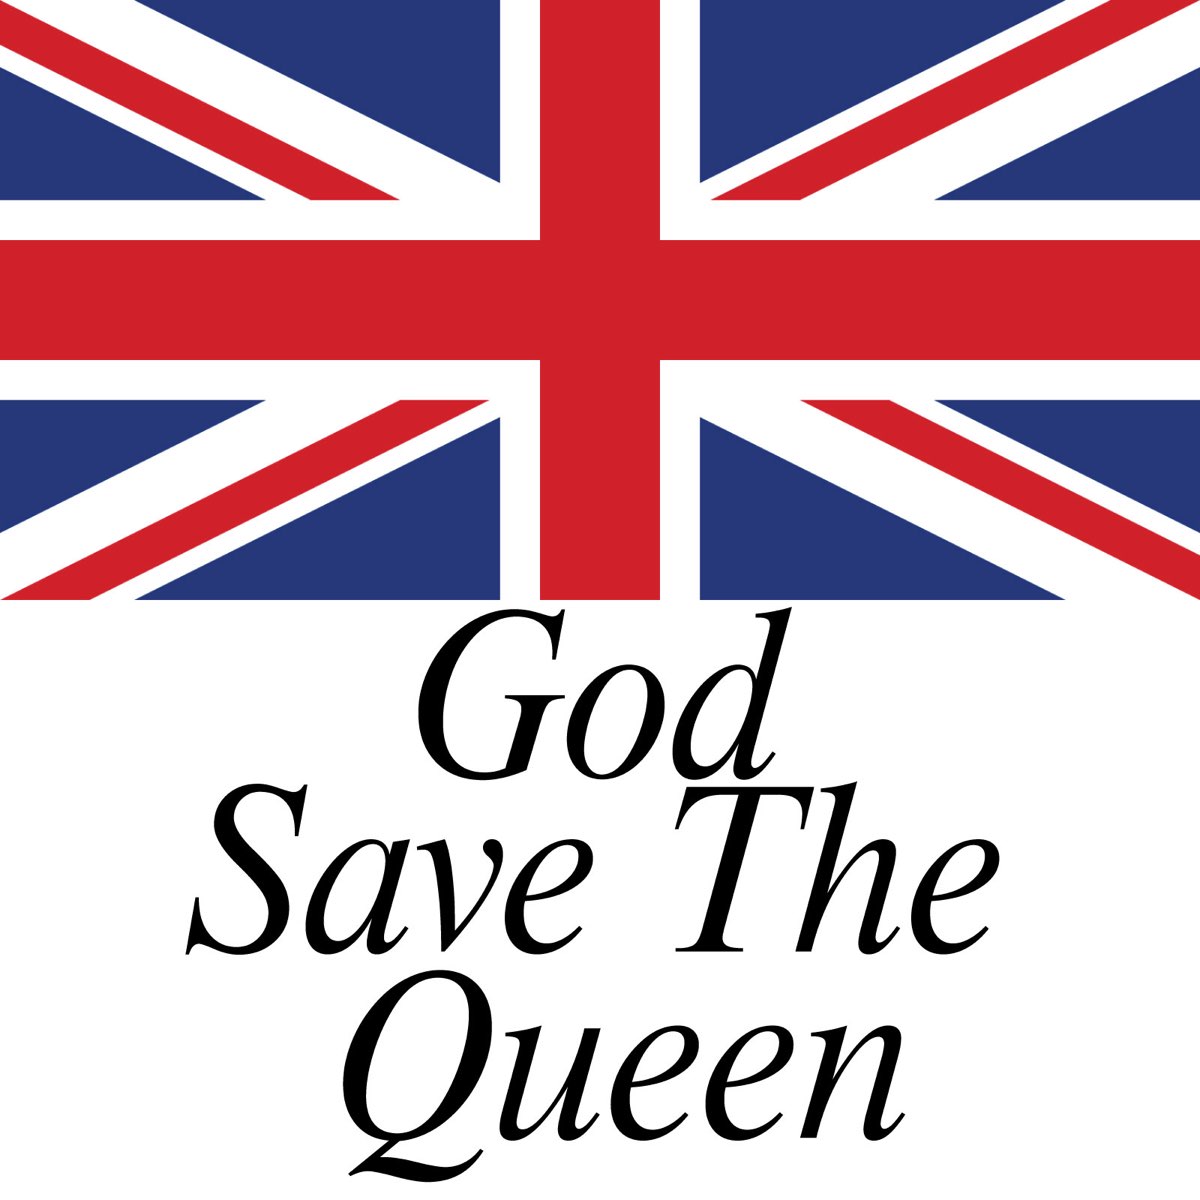 God Save the Queen (Single) by God Save The Queen on Apple Music